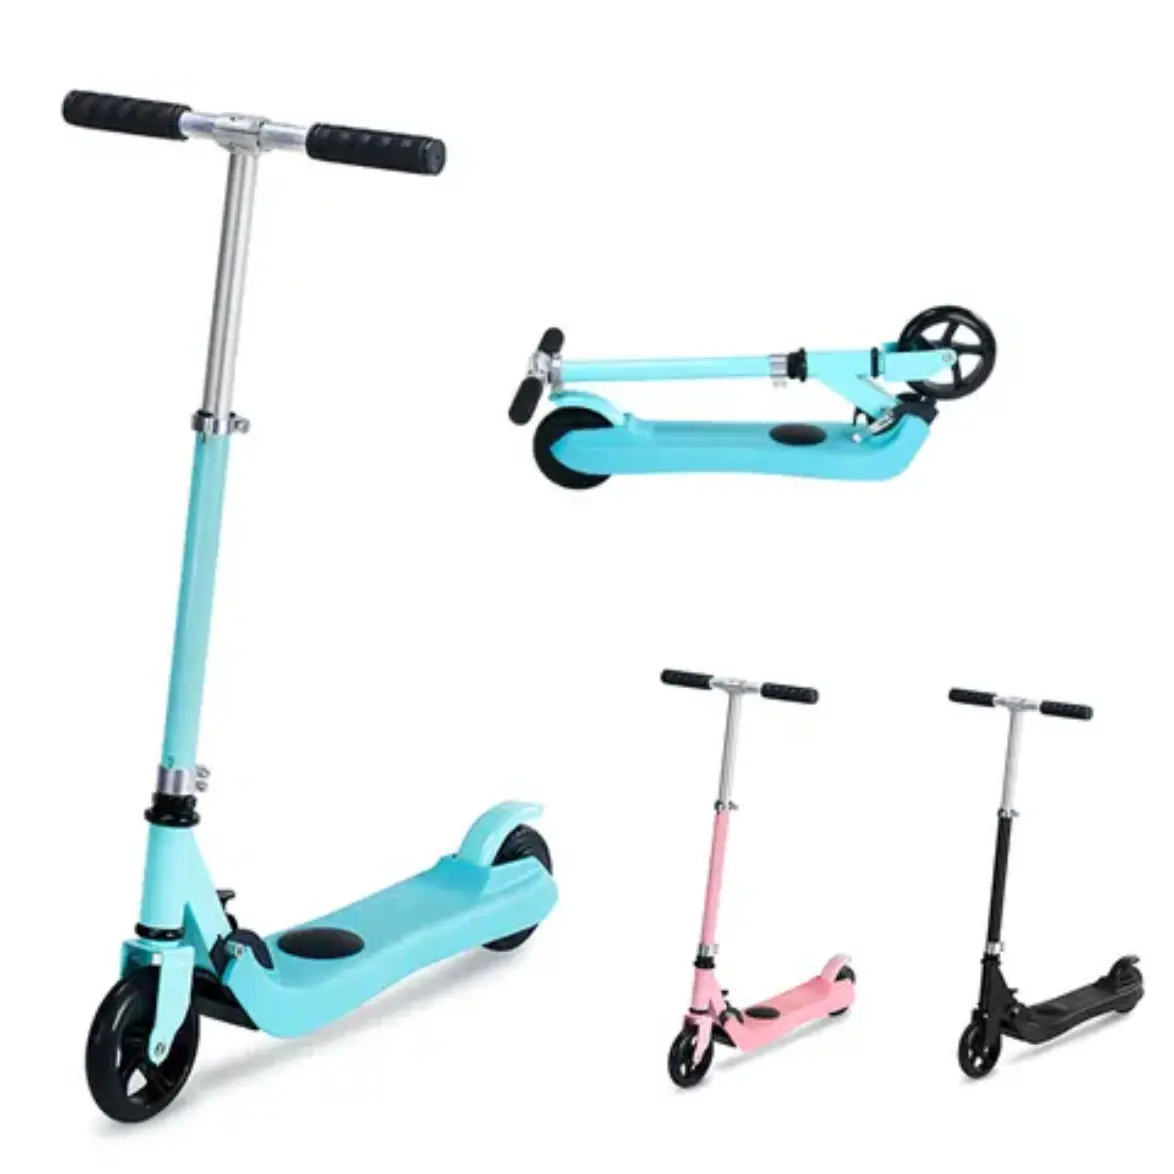 Top selling custom color Blue Pink Black scooter high quality scooter fast Battery 22.2V 2AH electronic scooter wholesale